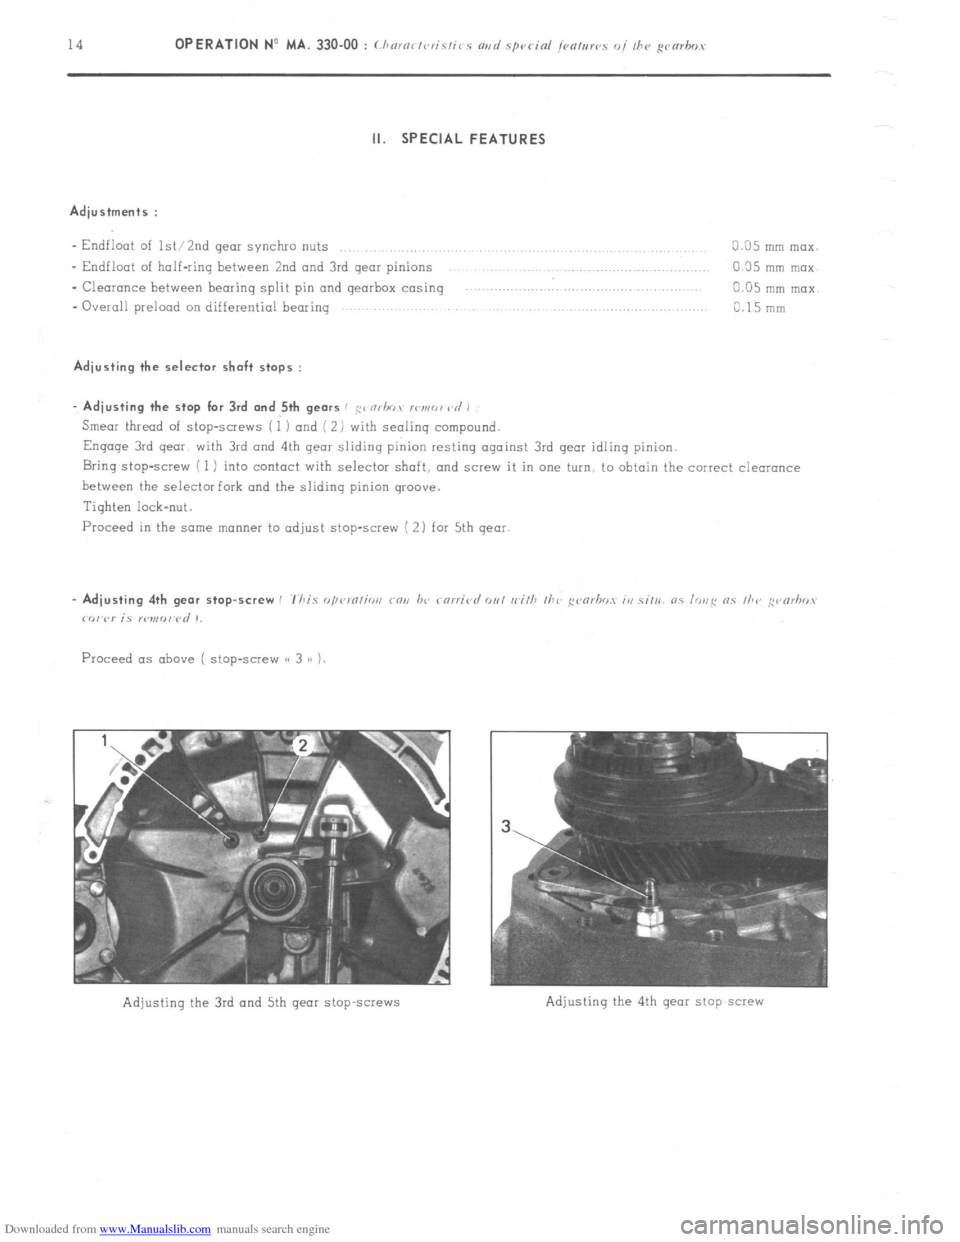 Citroen CX 1981 1.G Owners Manual Downloaded from www.Manualslib.com manuals search engine ii. SPECIAL FEATURES 
Adjustments : 
- Endfloat of lW2nd gear synchio nuts 
0.05 mm max. 
- Endfloot of half-ring between 2nd and 3rd gear pini